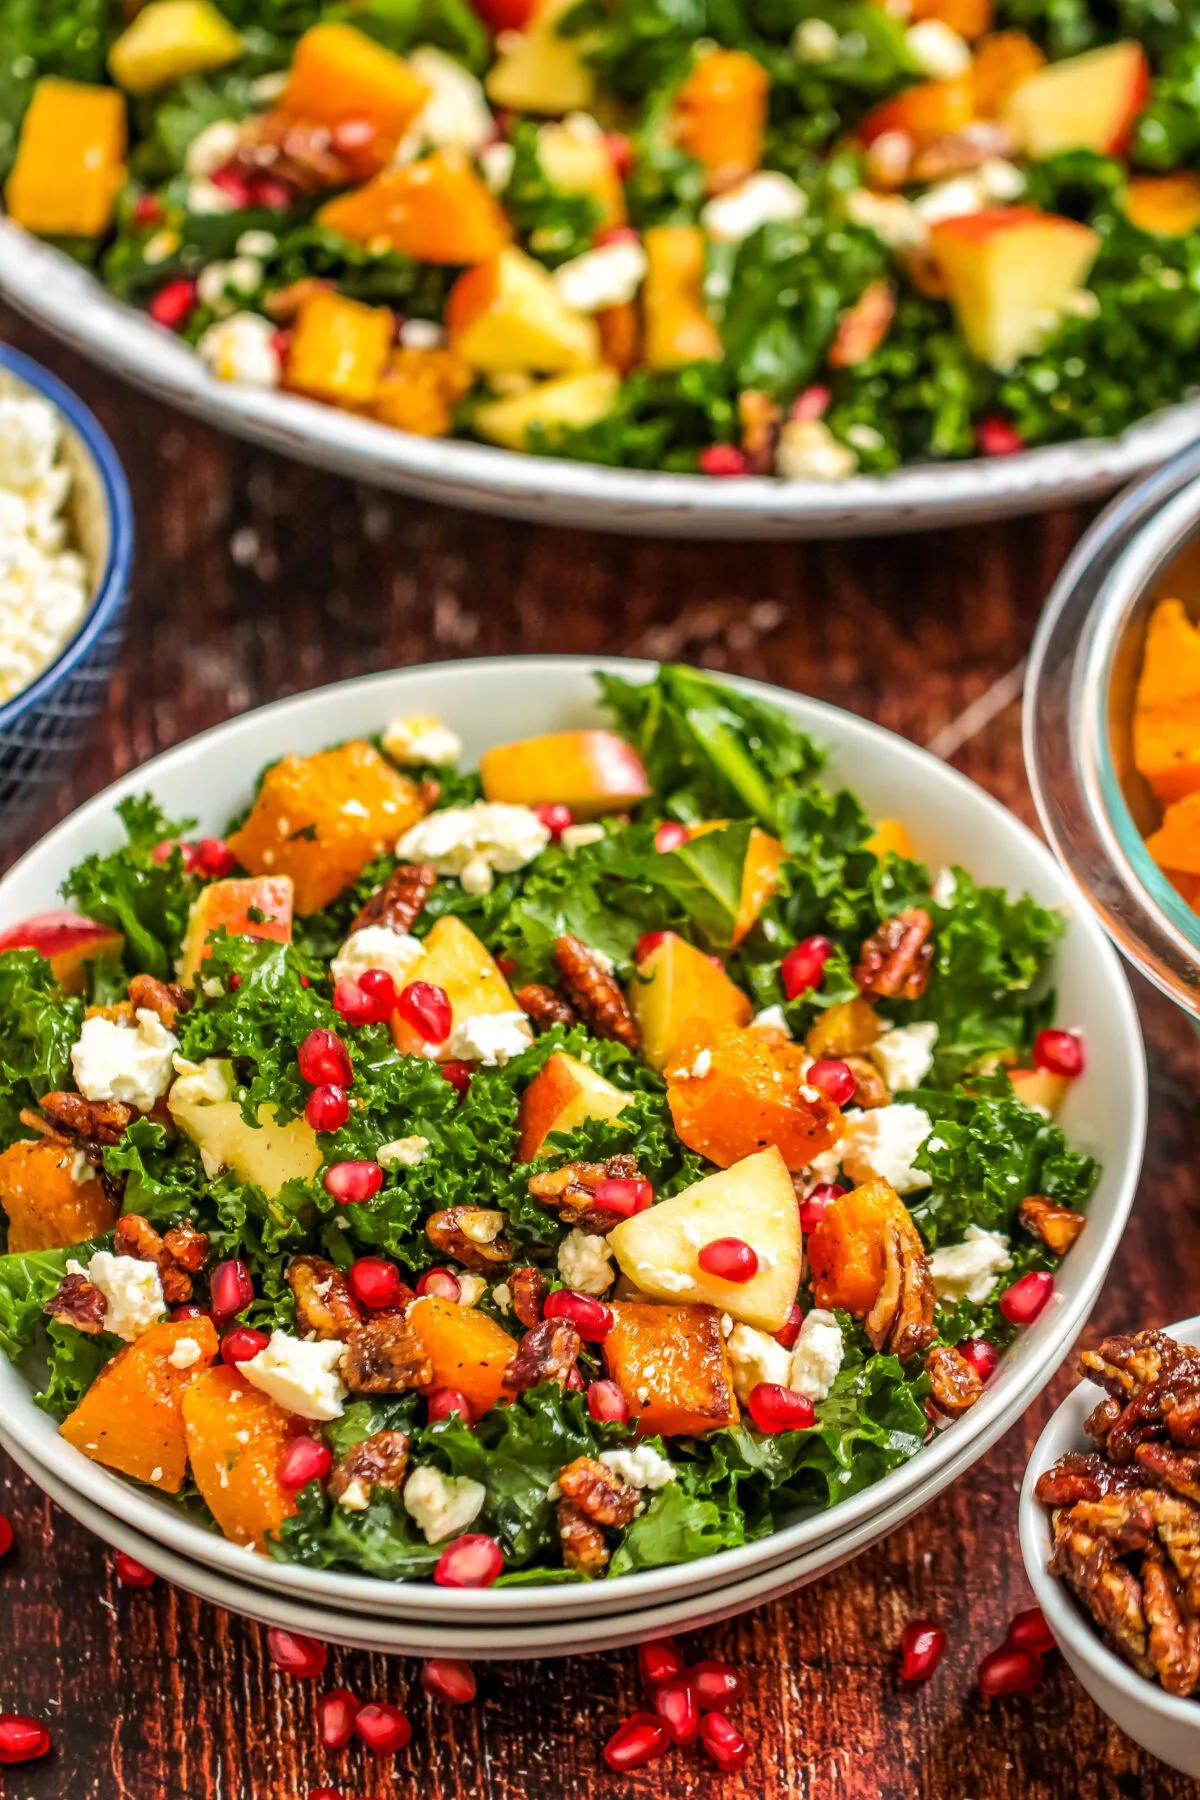 A beautiful salad that's perfect for fall, this Roasted Butternut Squash & Apple Salad recipe features candied pecans and feta cheese.